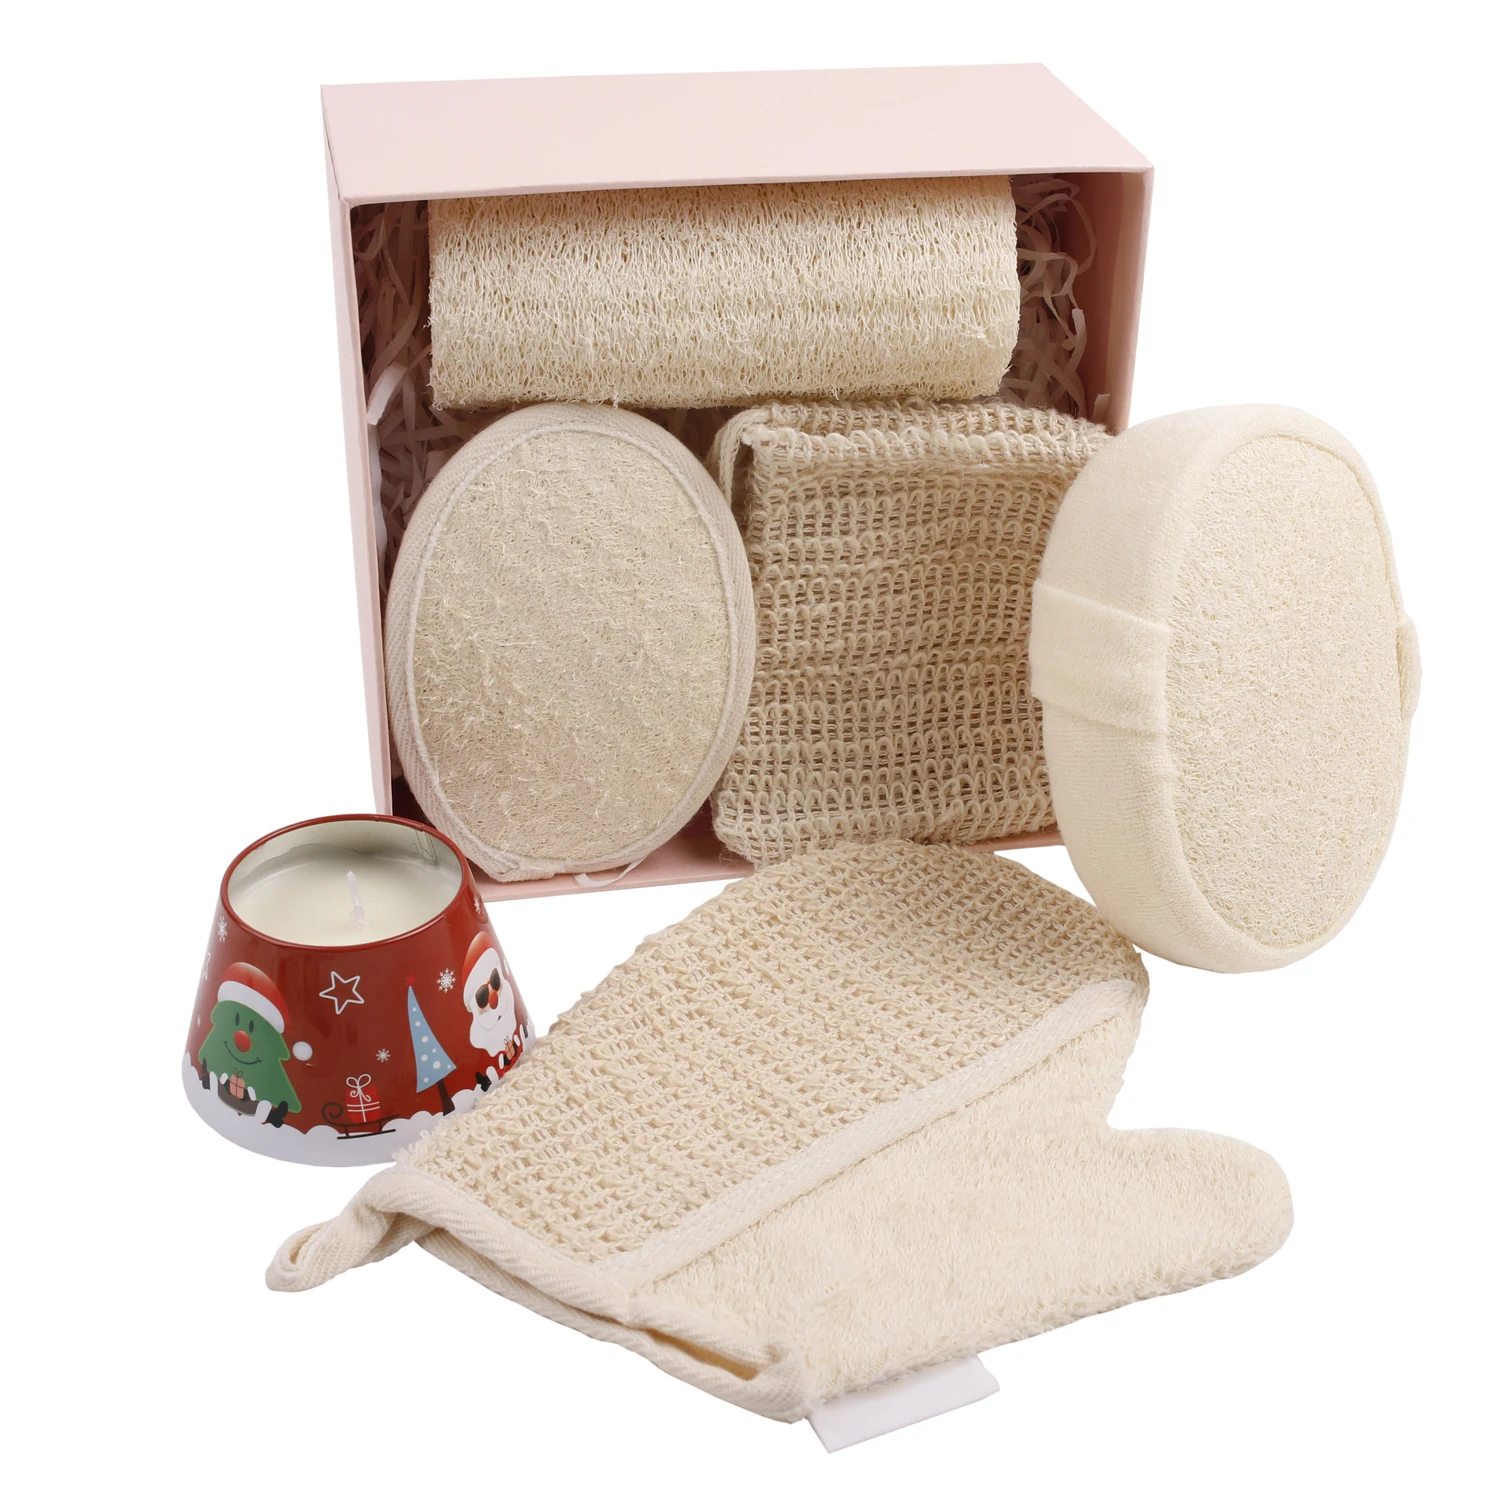 

Eco-friendly New Natural Exfoliating Body Pot Scrub Scrubber Durable Healthy Massage Brush Accessories Soft Loofah Bath Sponge, Natural/customized